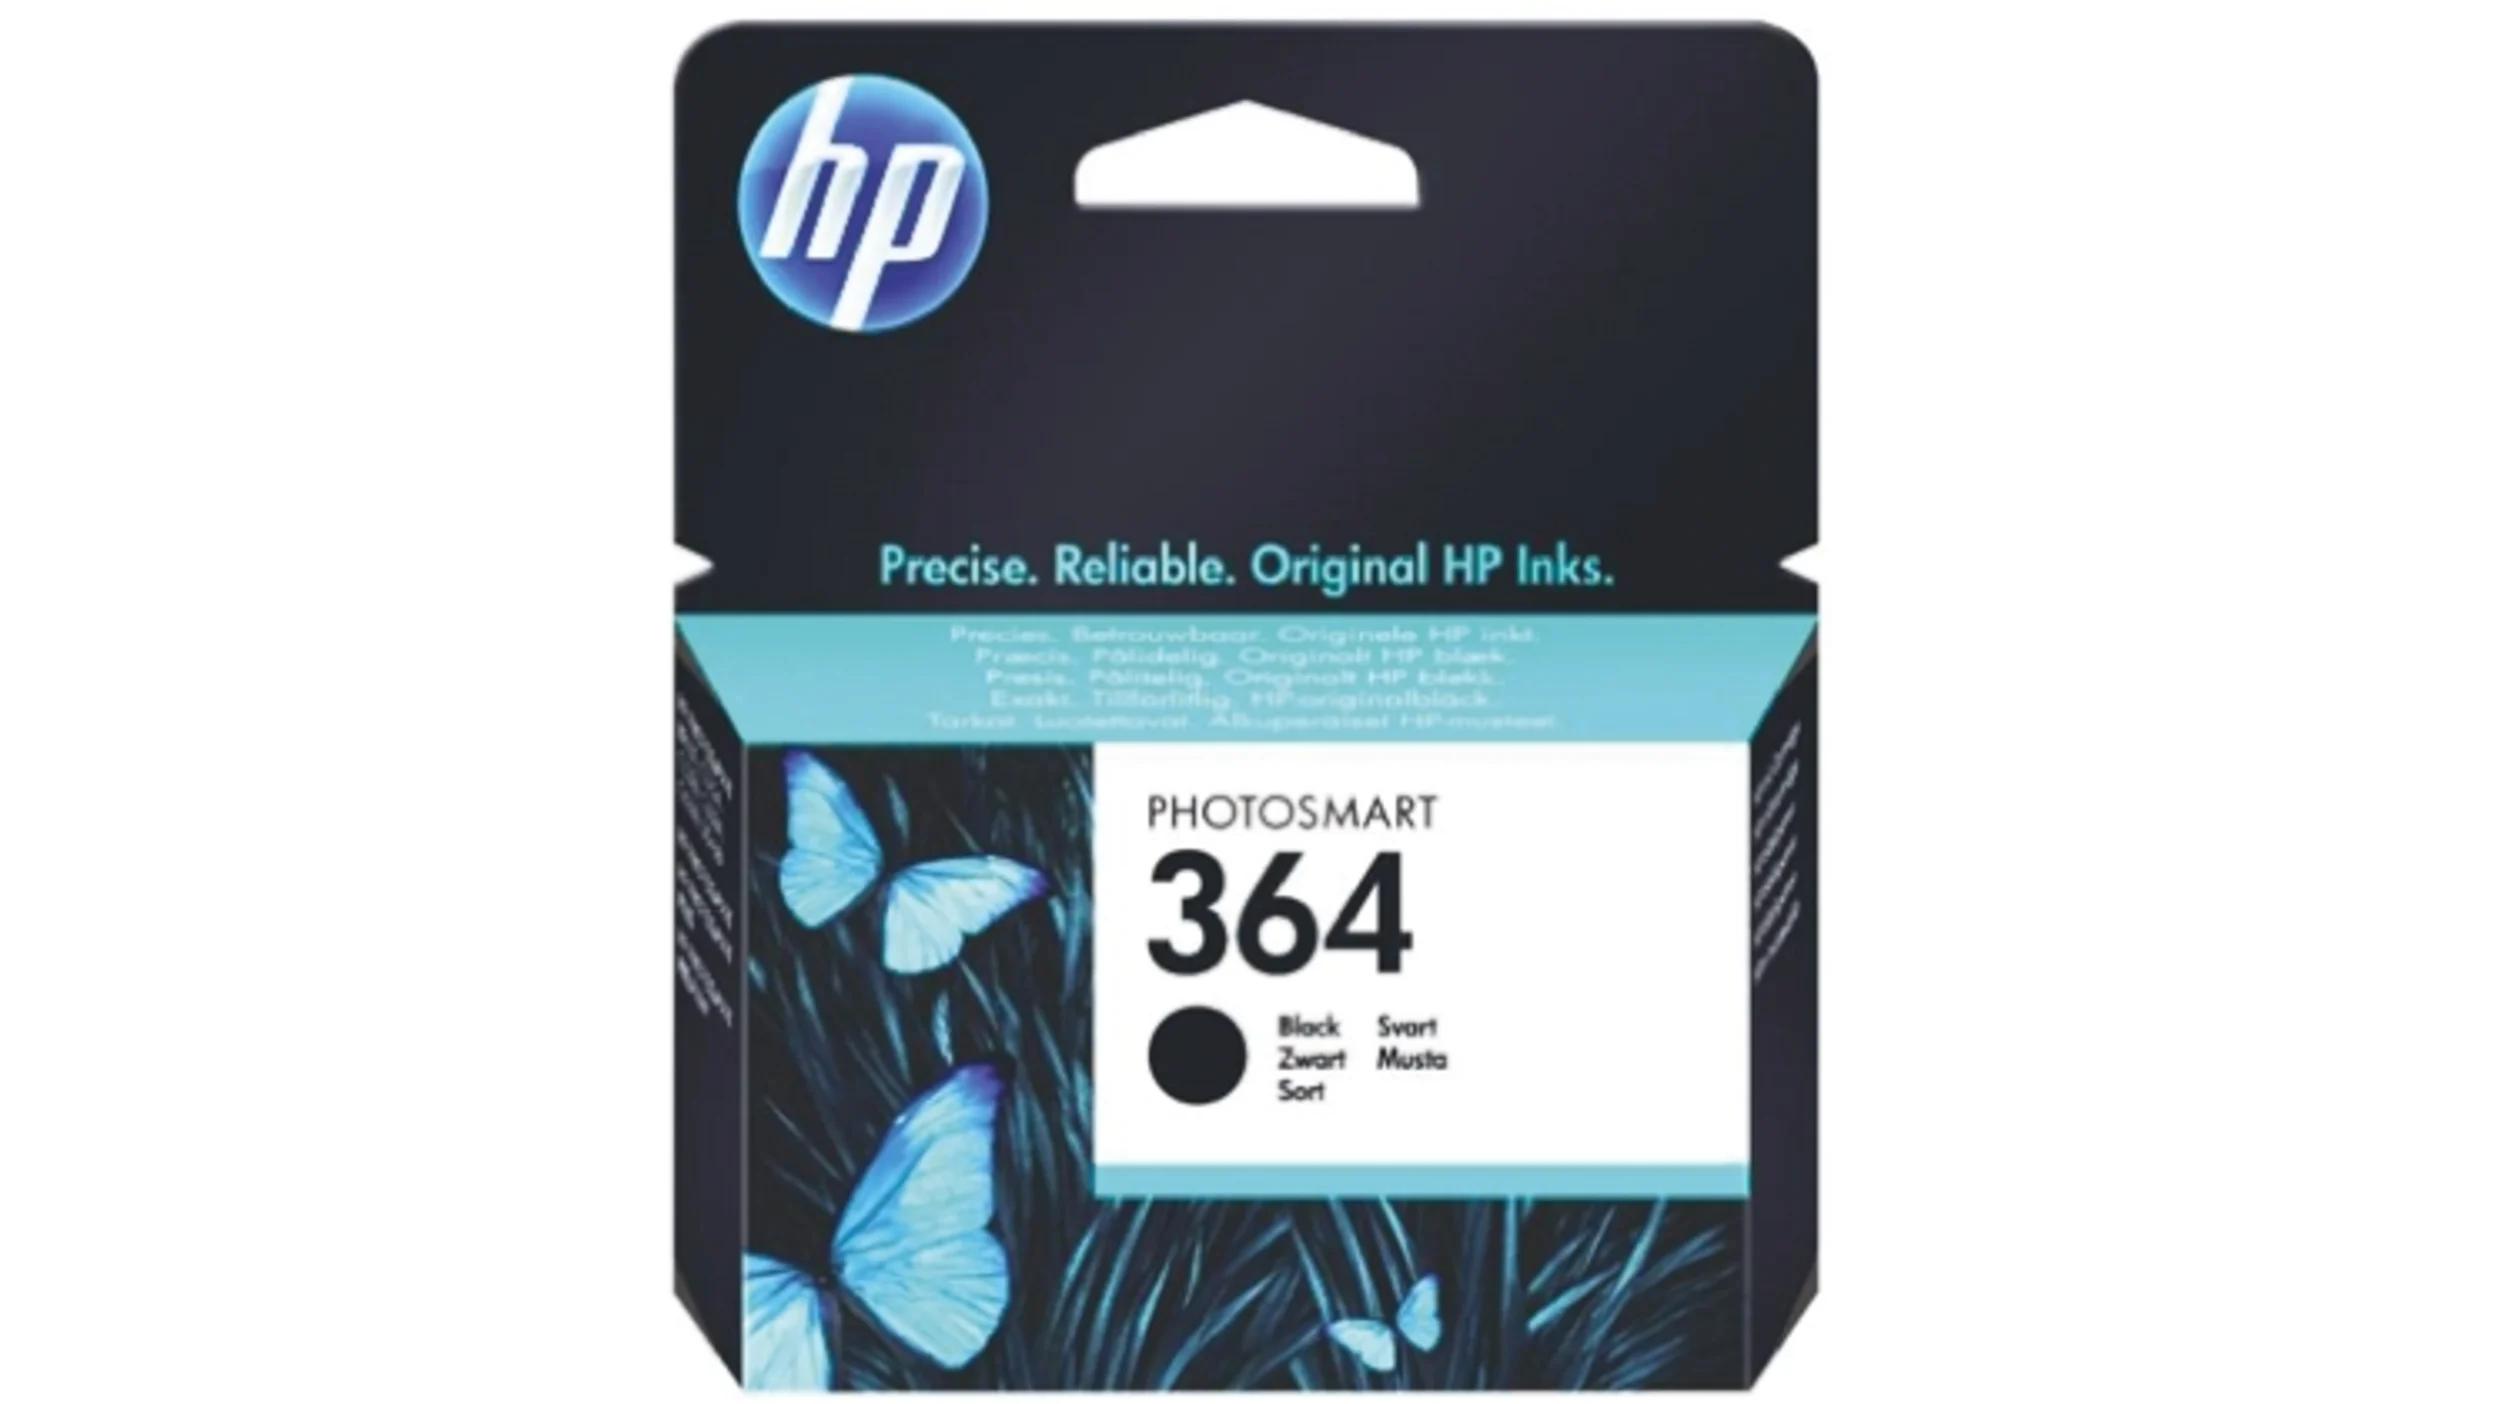 hewlett-packard 364 photo ink cartridge black - What is the difference between black and photo black ink